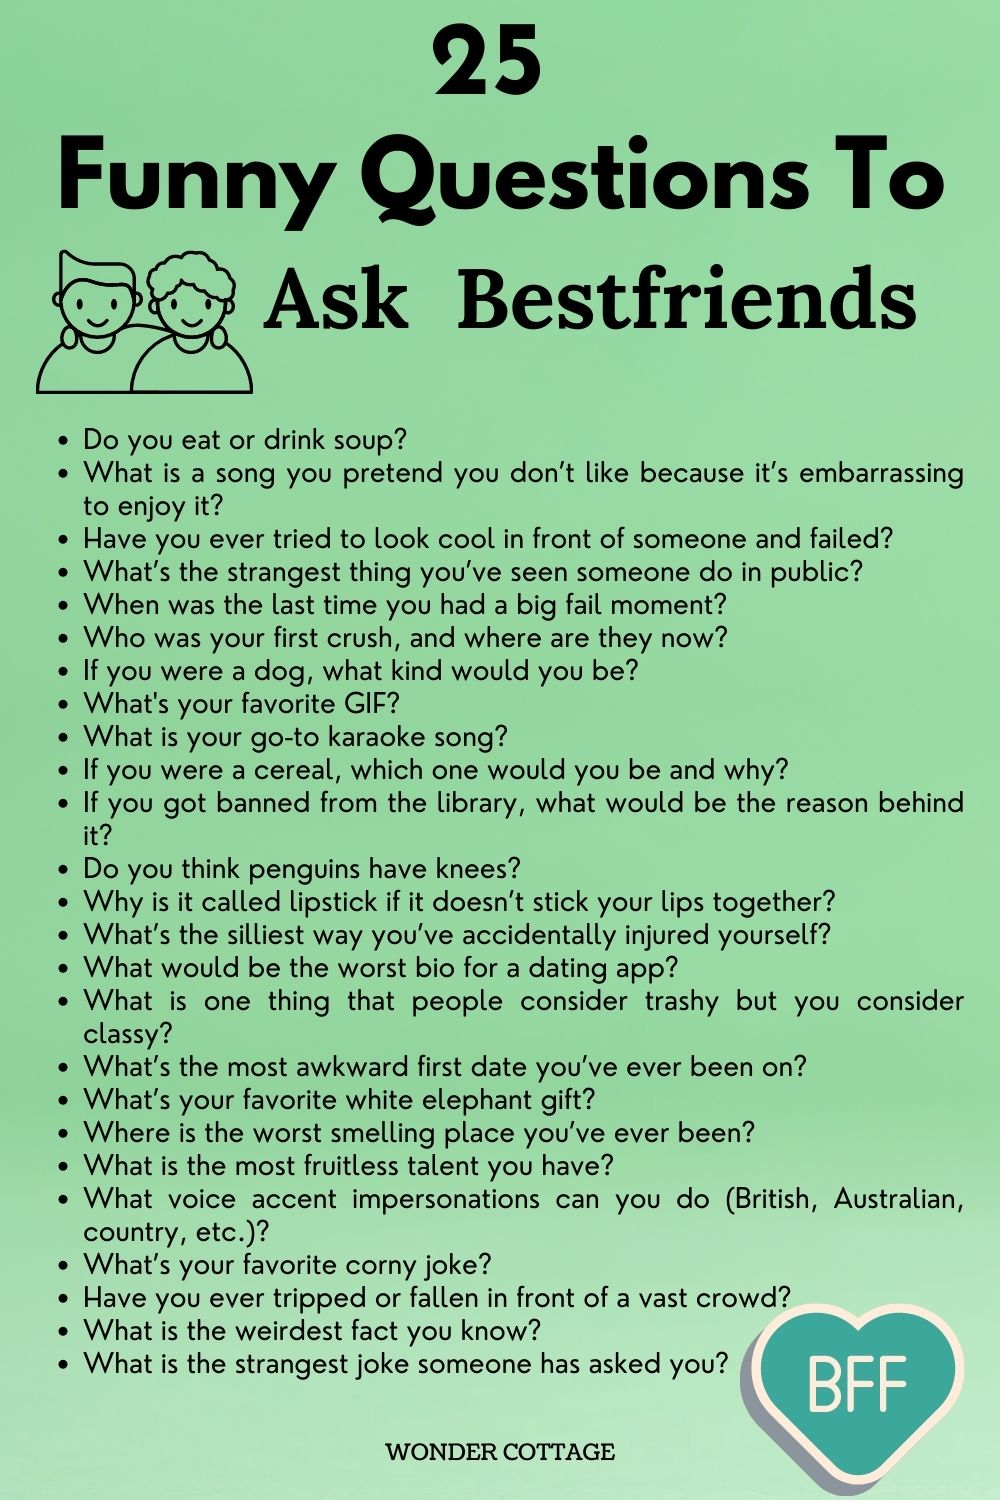 Funny questions to ask bestfriends